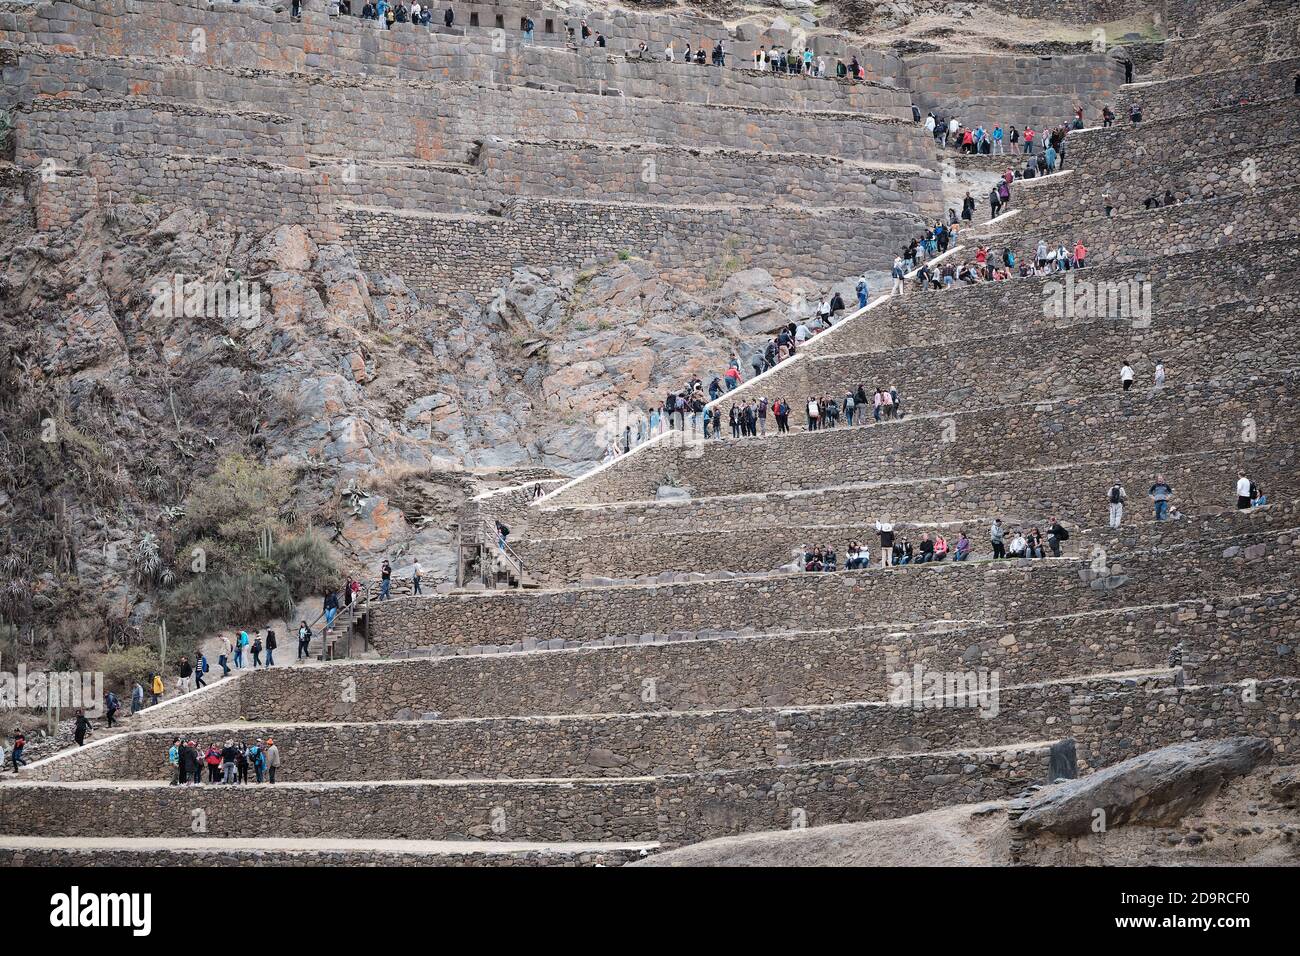 Tourists dwarfed by the scale of the Terraces of Pumatallis at the Incan ruins at Ollantaytambo, Peru Stock Photo